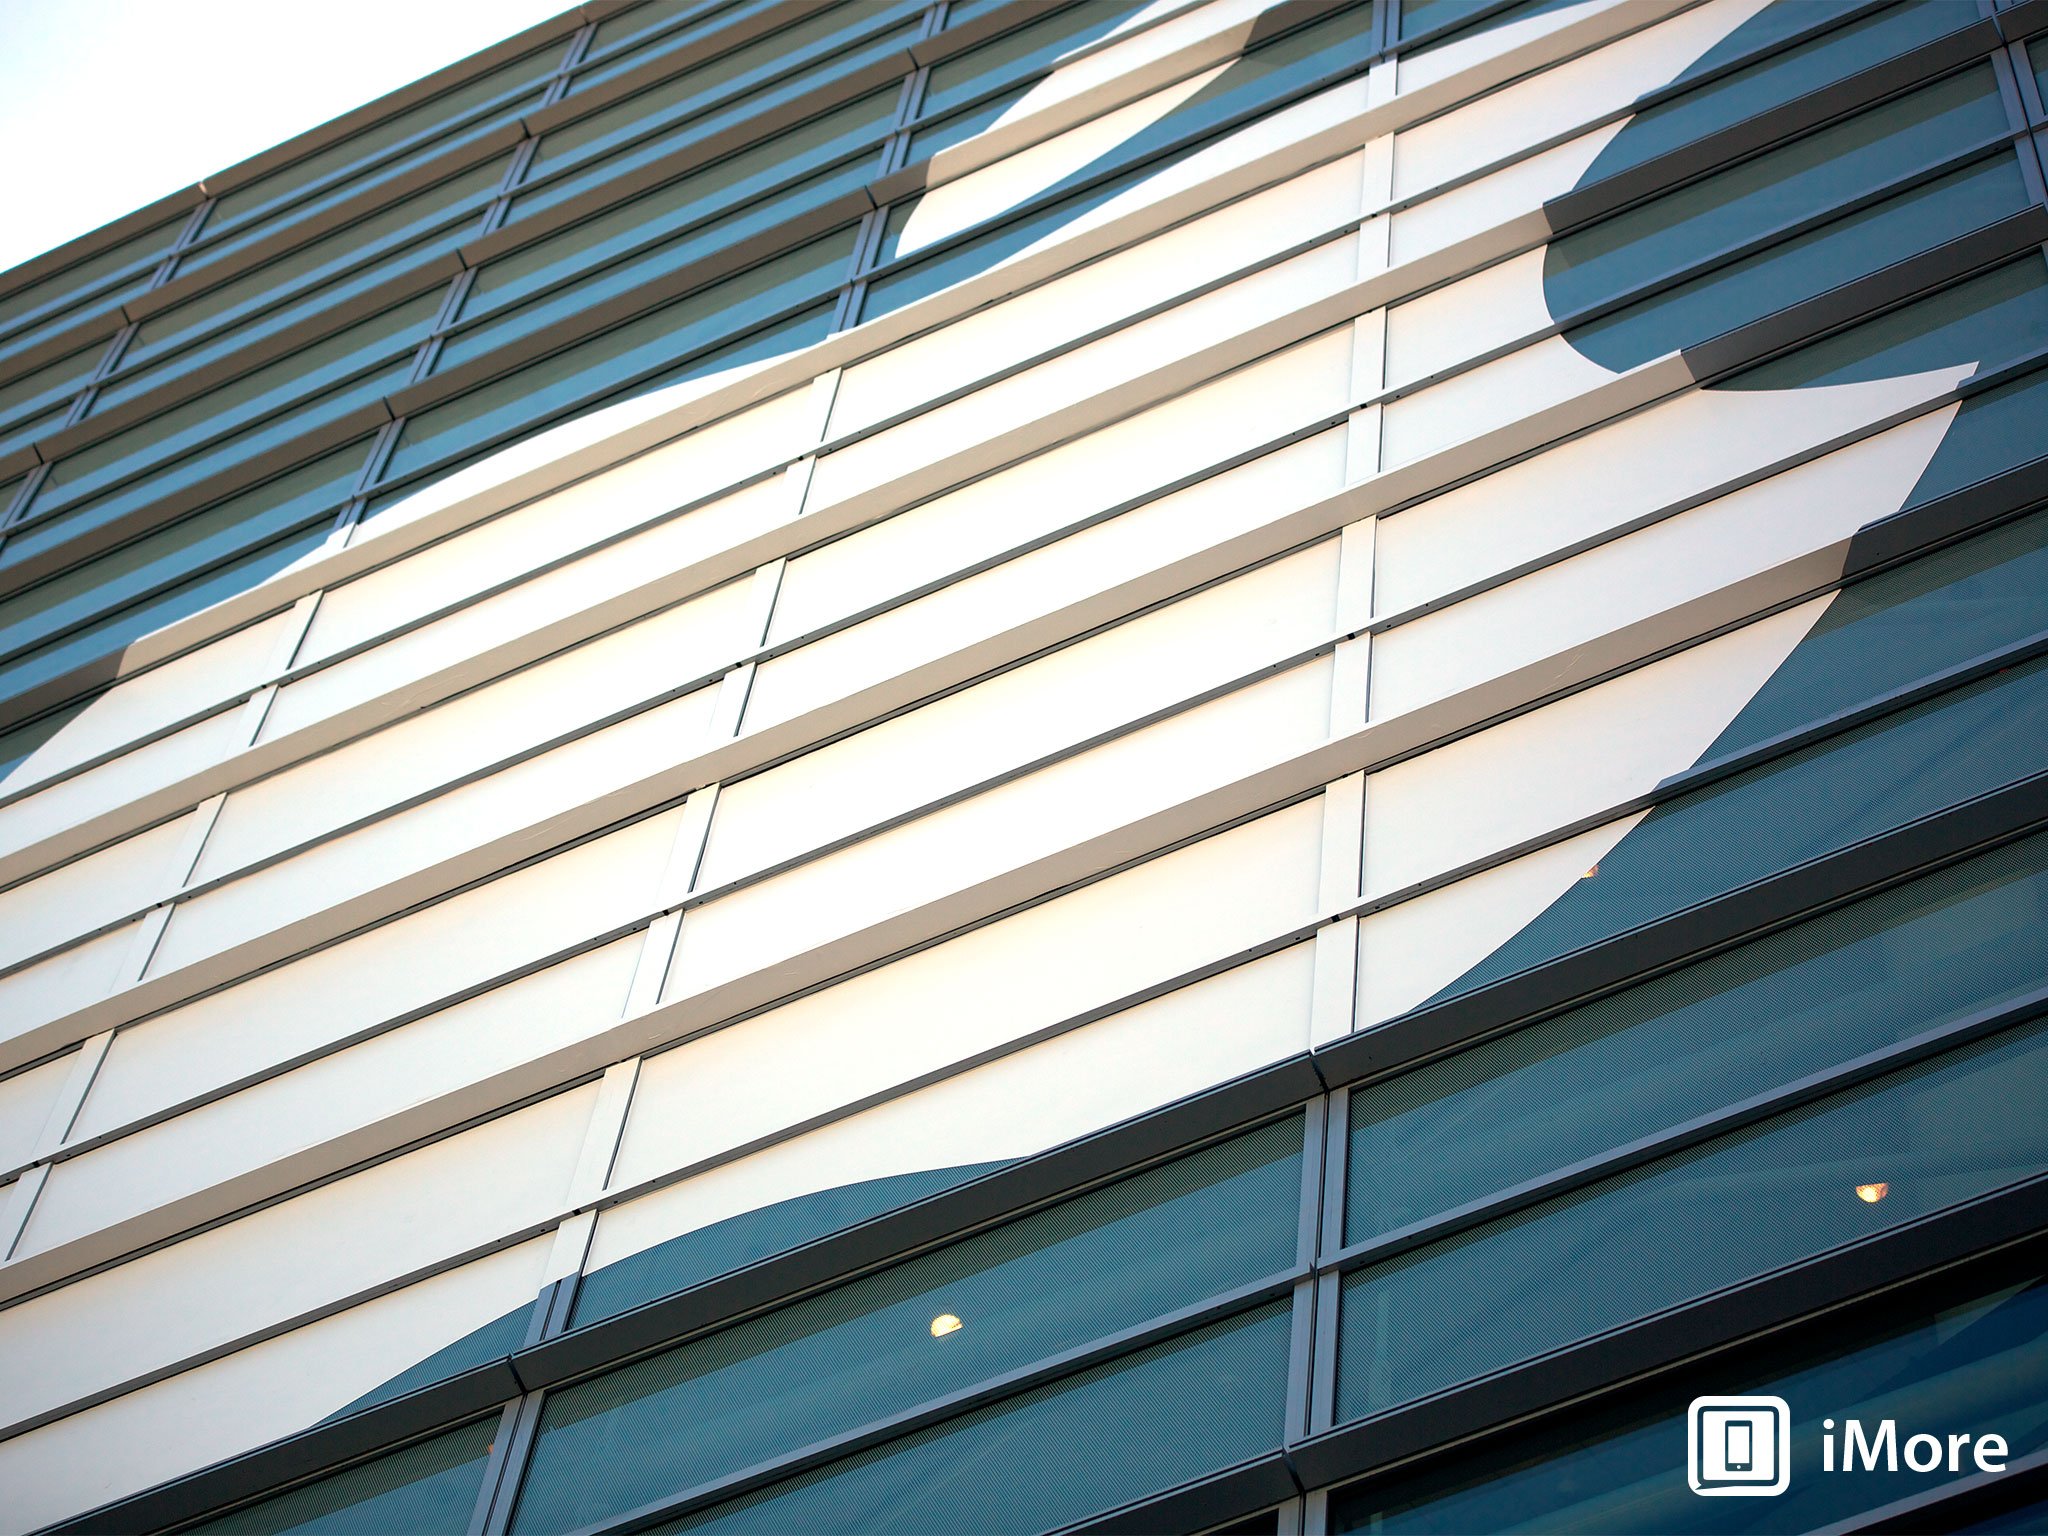 Apple once again speculated to be the first trillion dollar company. So why now?